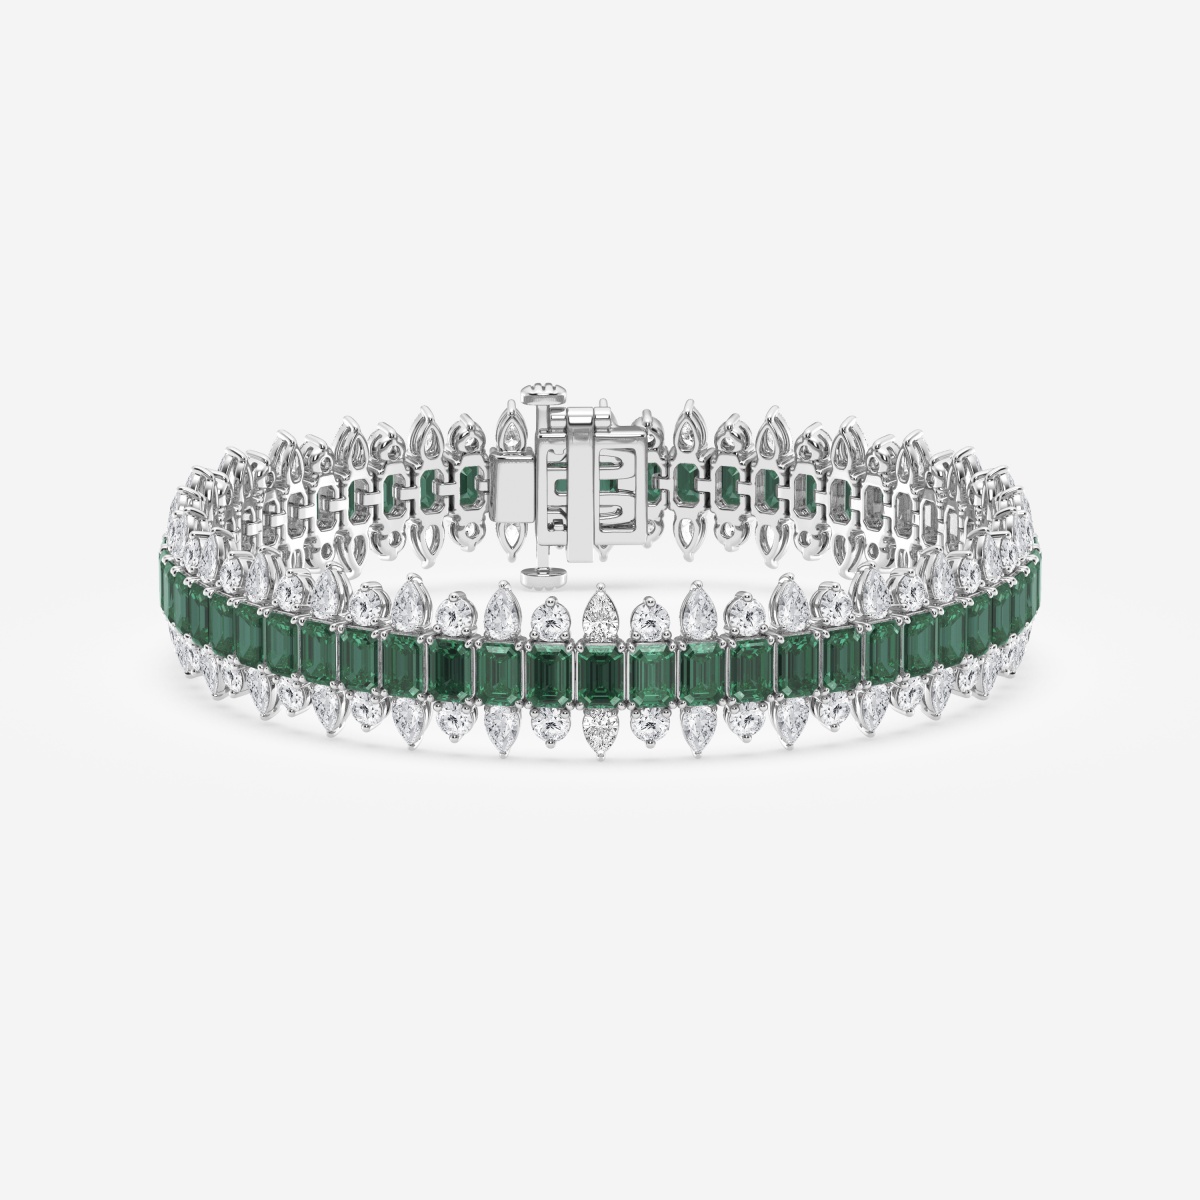 4.1x2.9 mm Created Emerald and 5 1/2 ctw Round and Pear Lab Grown Diamond Fashion Bracelet - 7 Inches